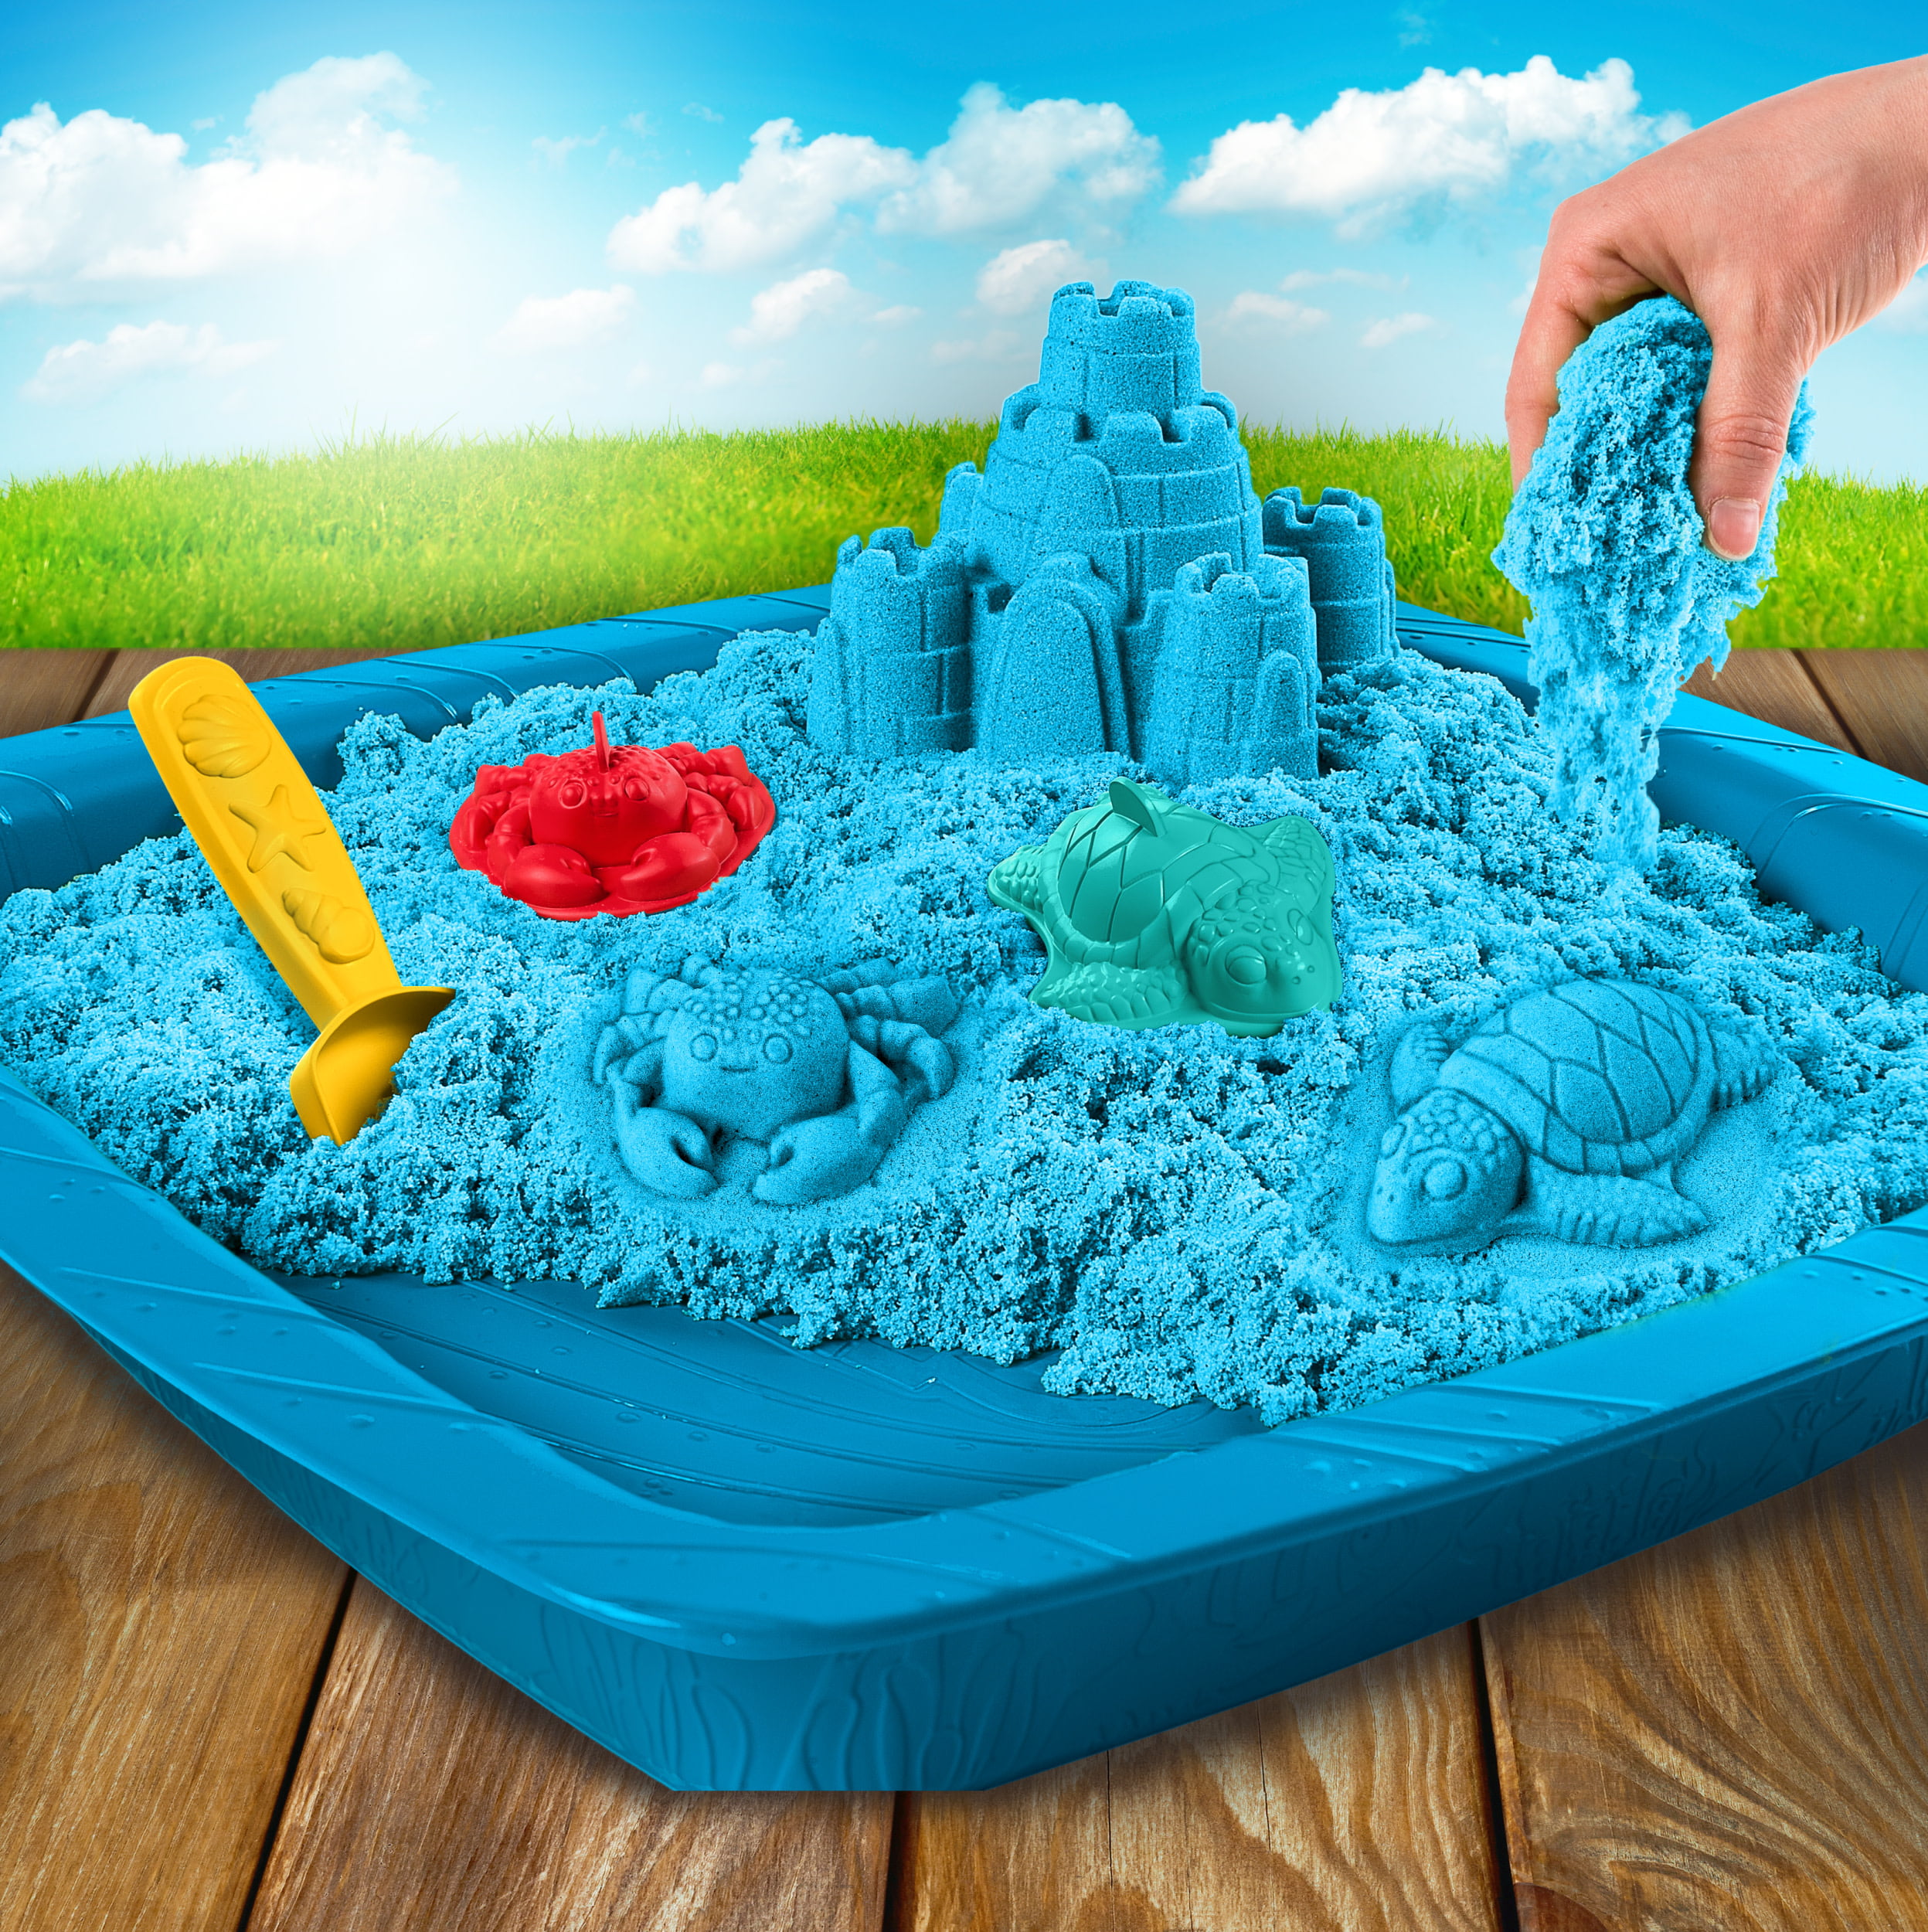 Where Can I Buy Kinetic Sand in Bulk: Best Places to Shop - Magicsand